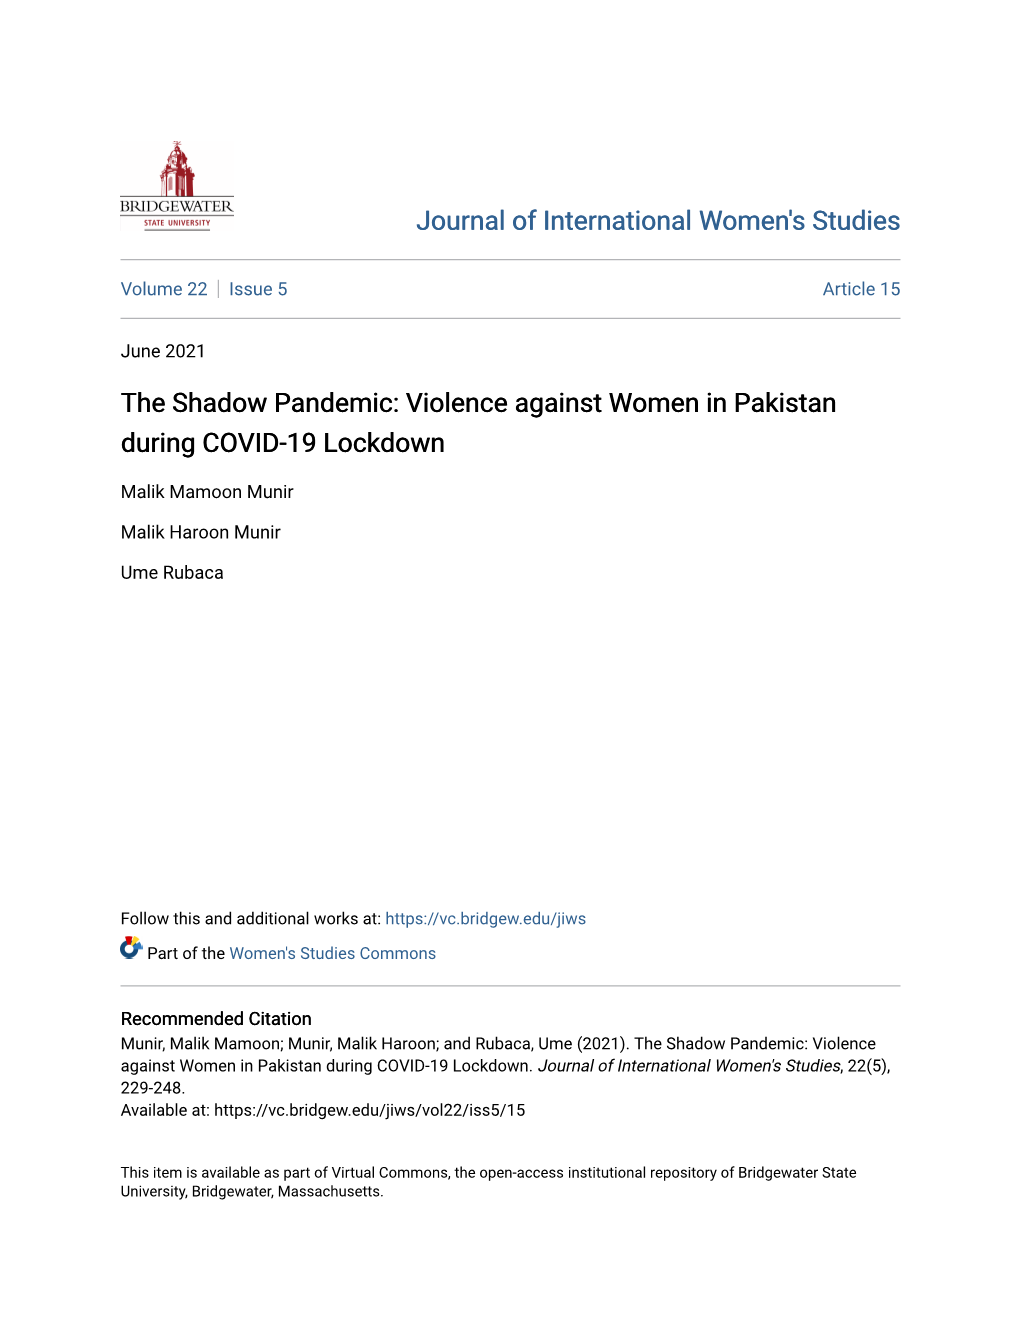 Violence Against Women in Pakistan During COVID-19 Lockdown